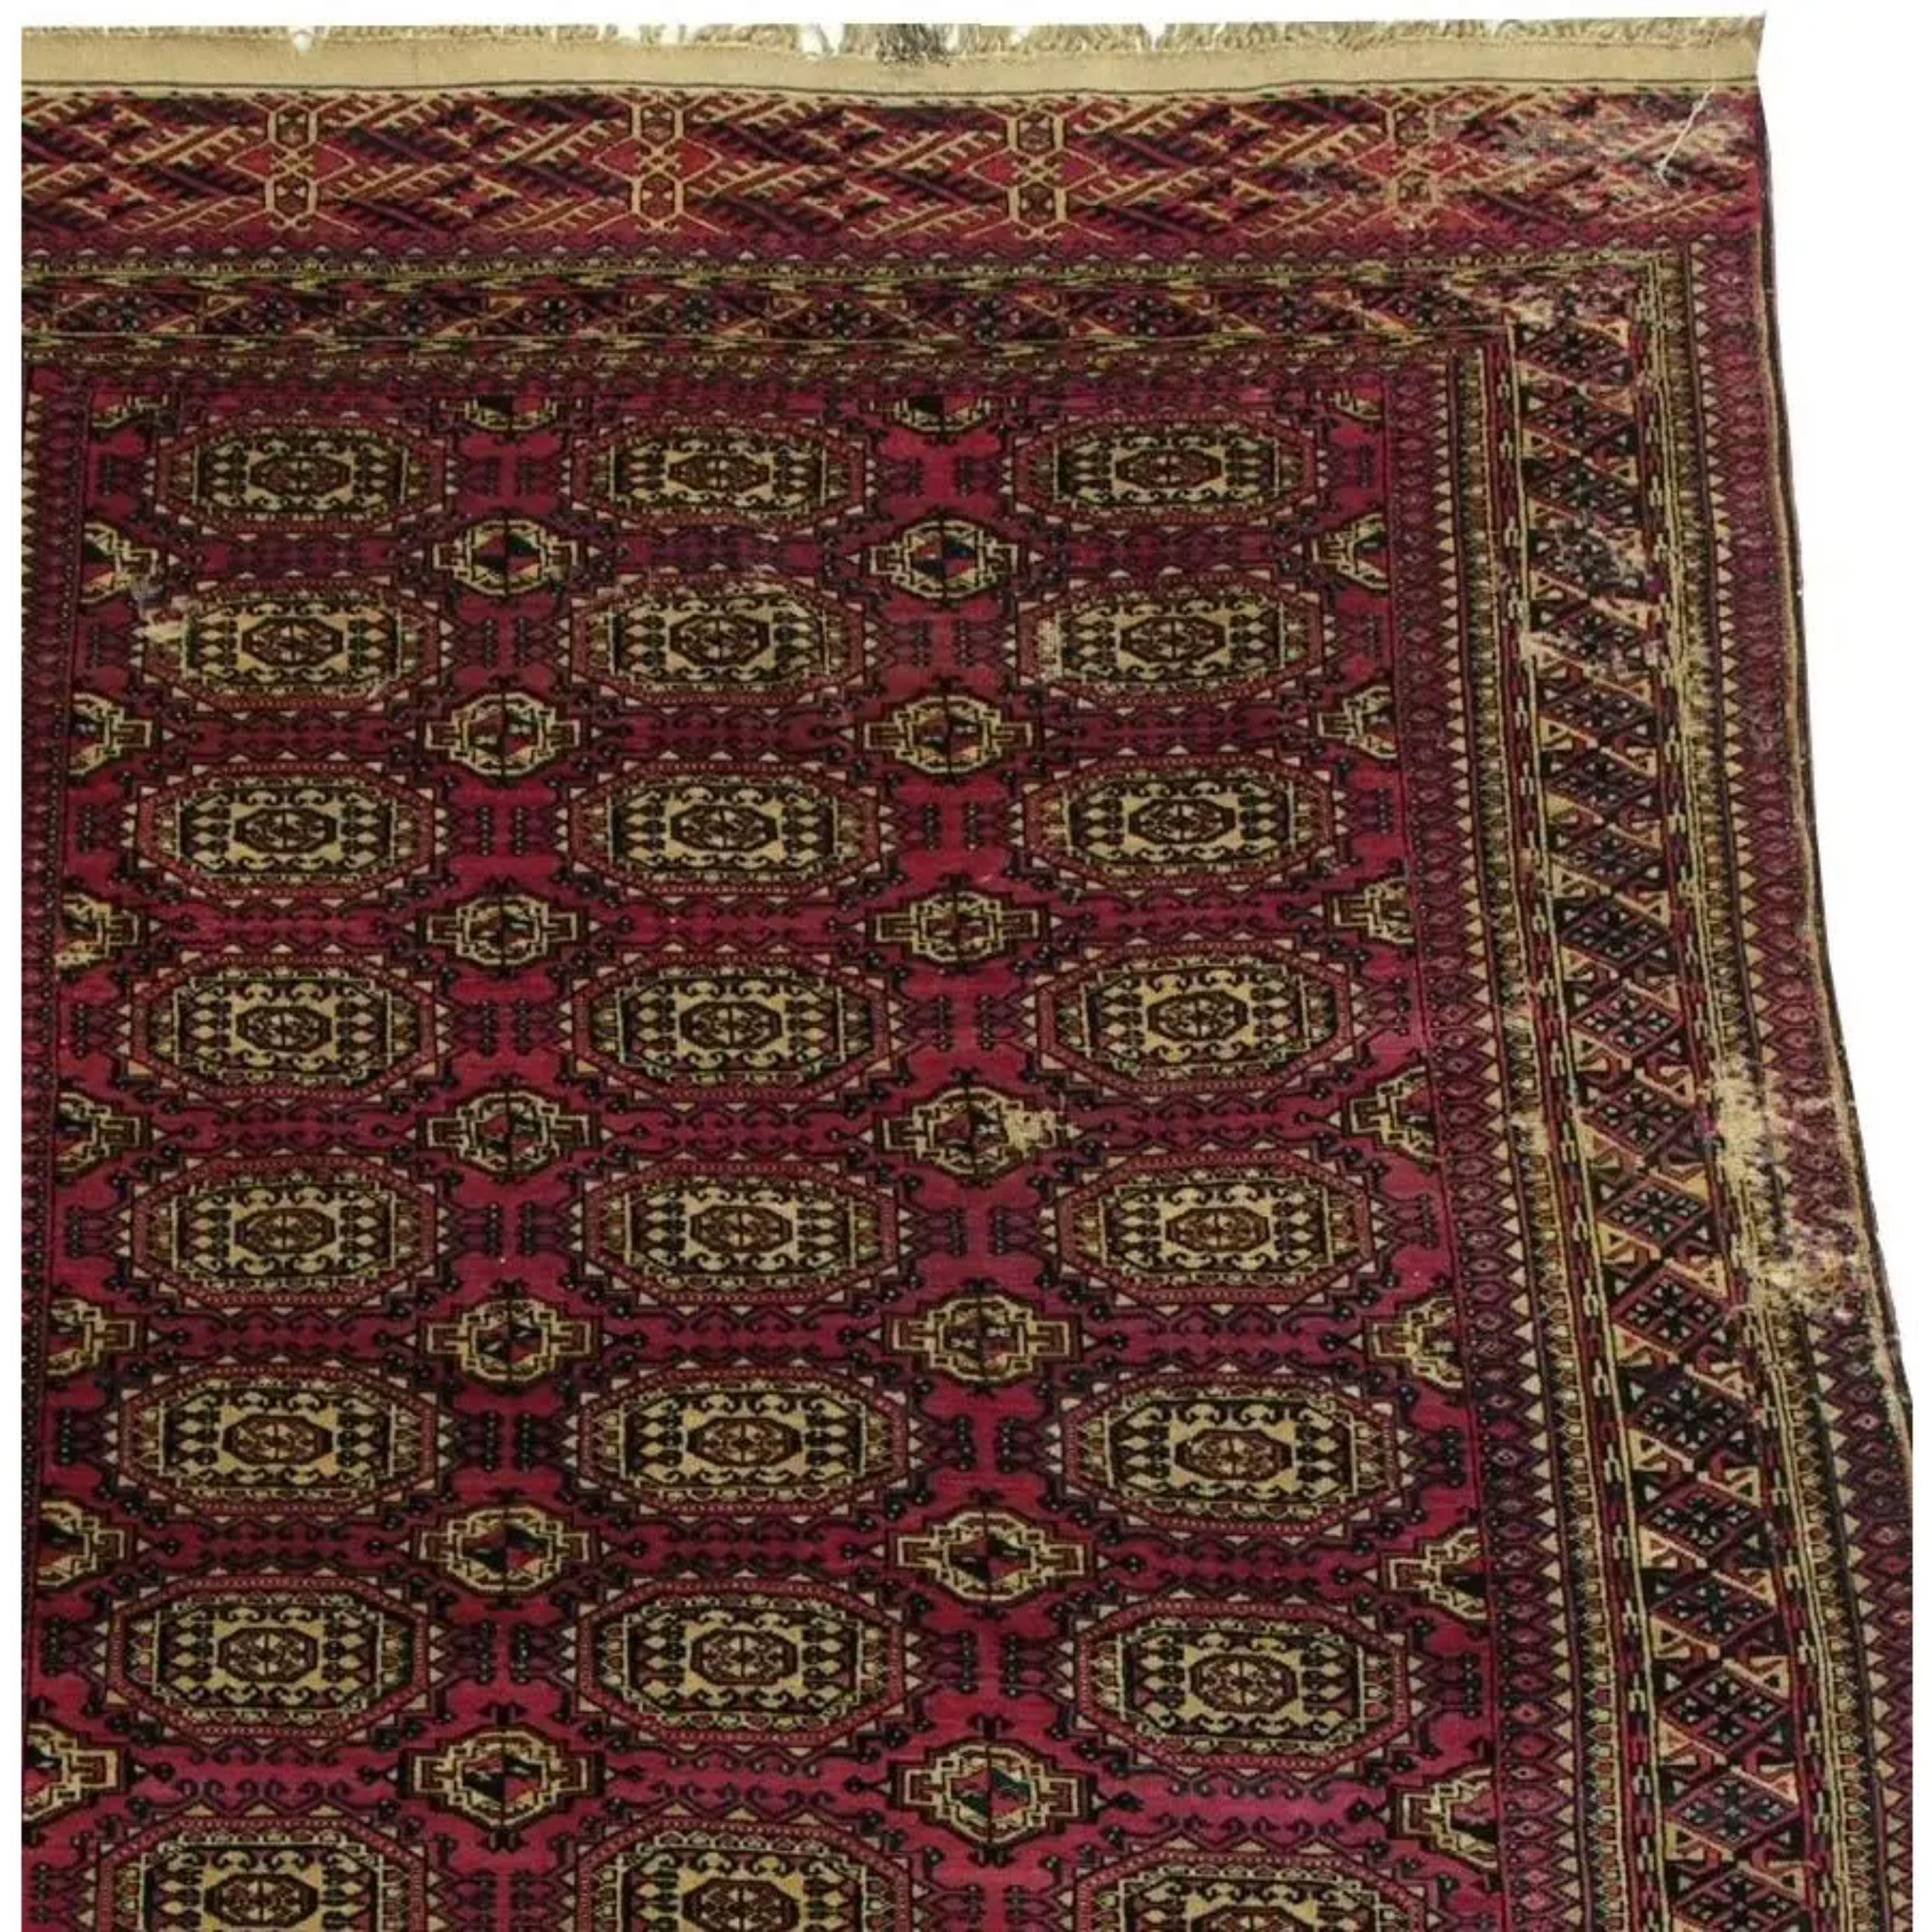 This is an Antique Persian Bokhara Woolen Rug